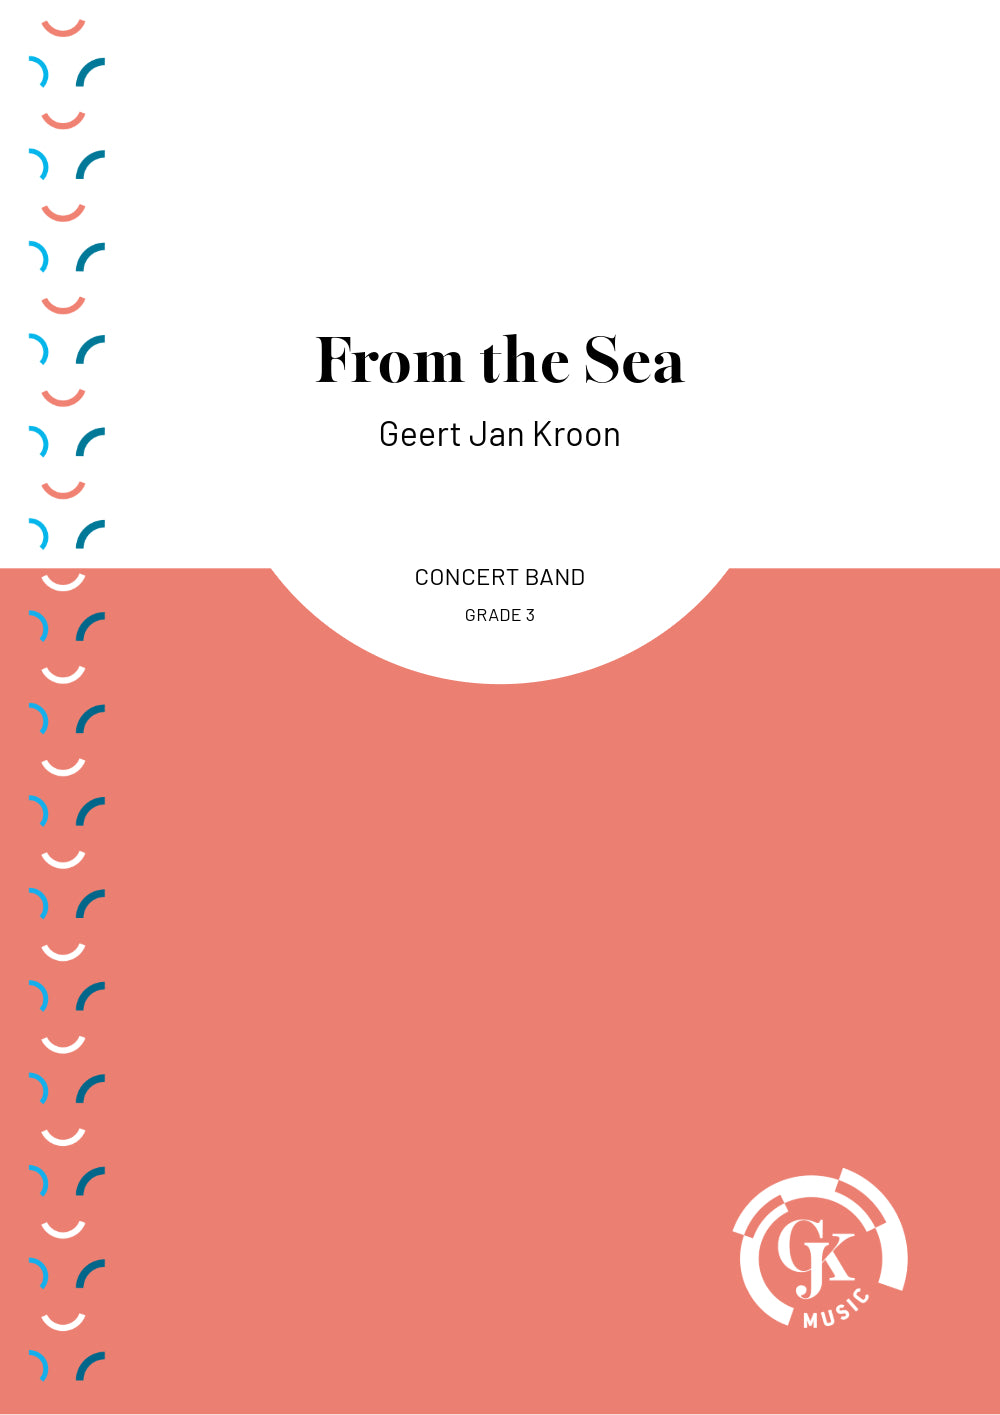 From the Sea - Concert Band